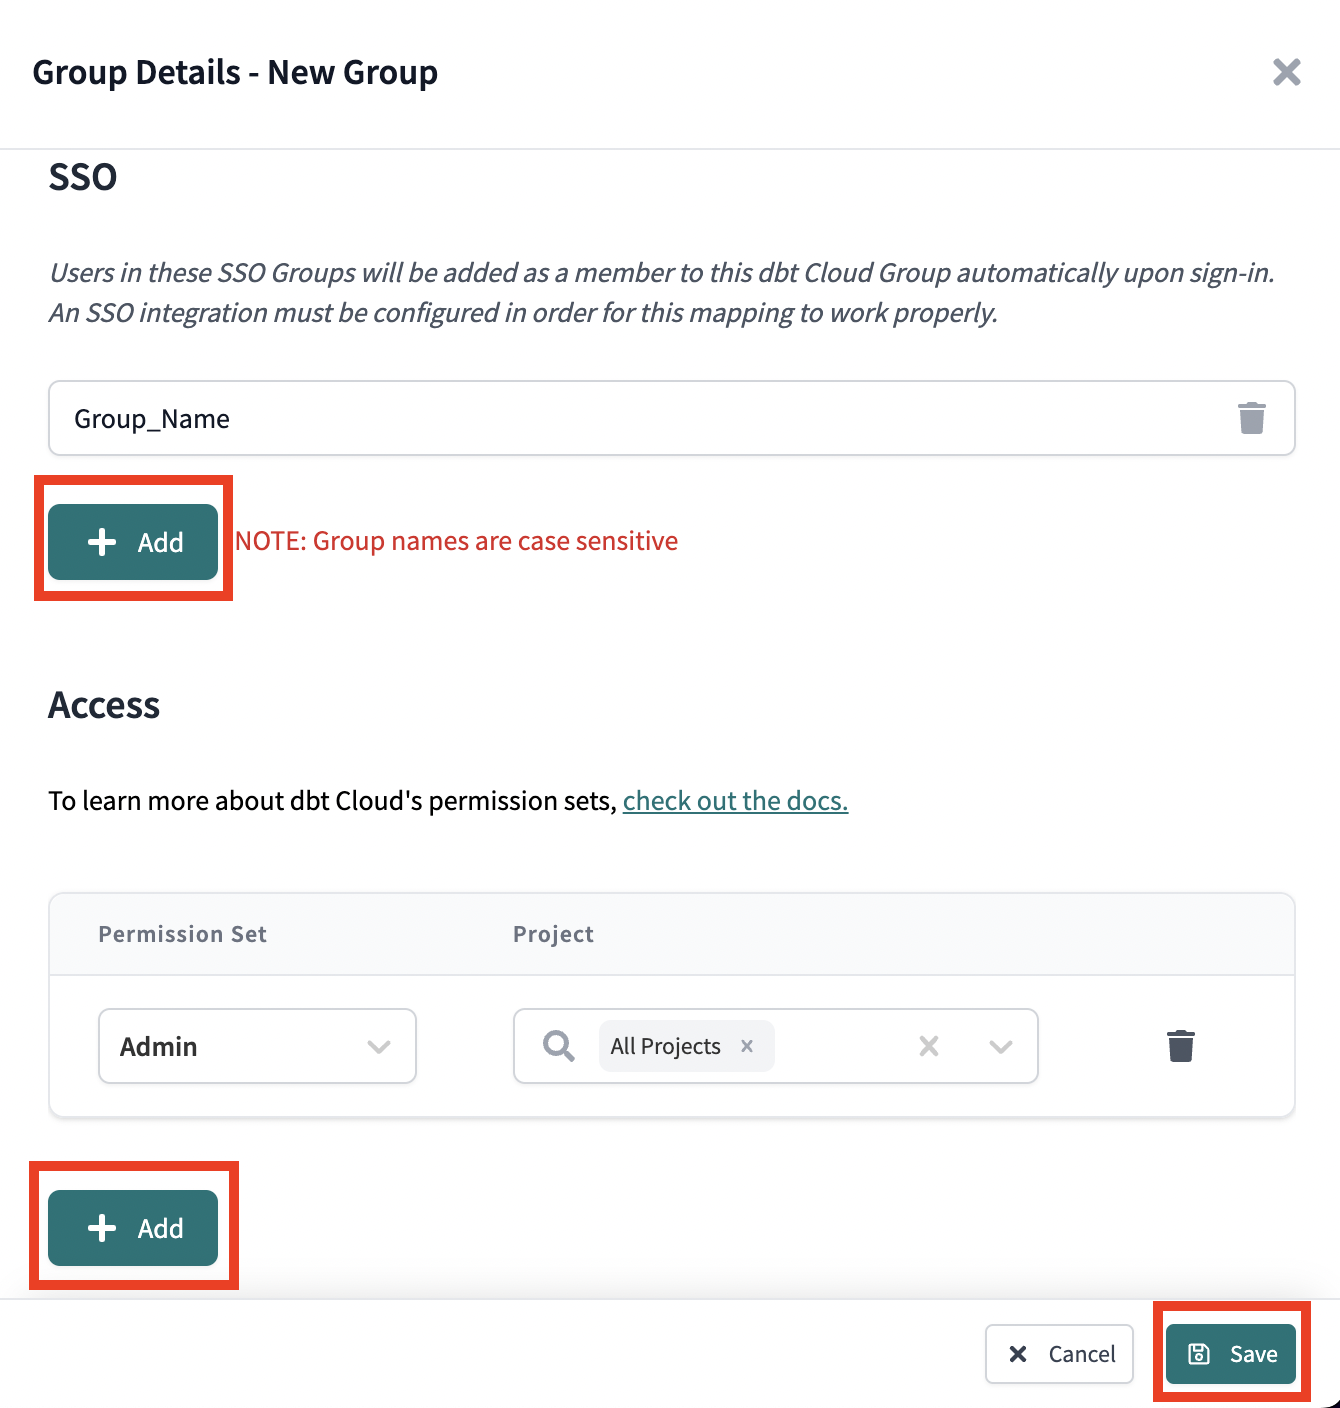 Configure SSO groups and Access permissions